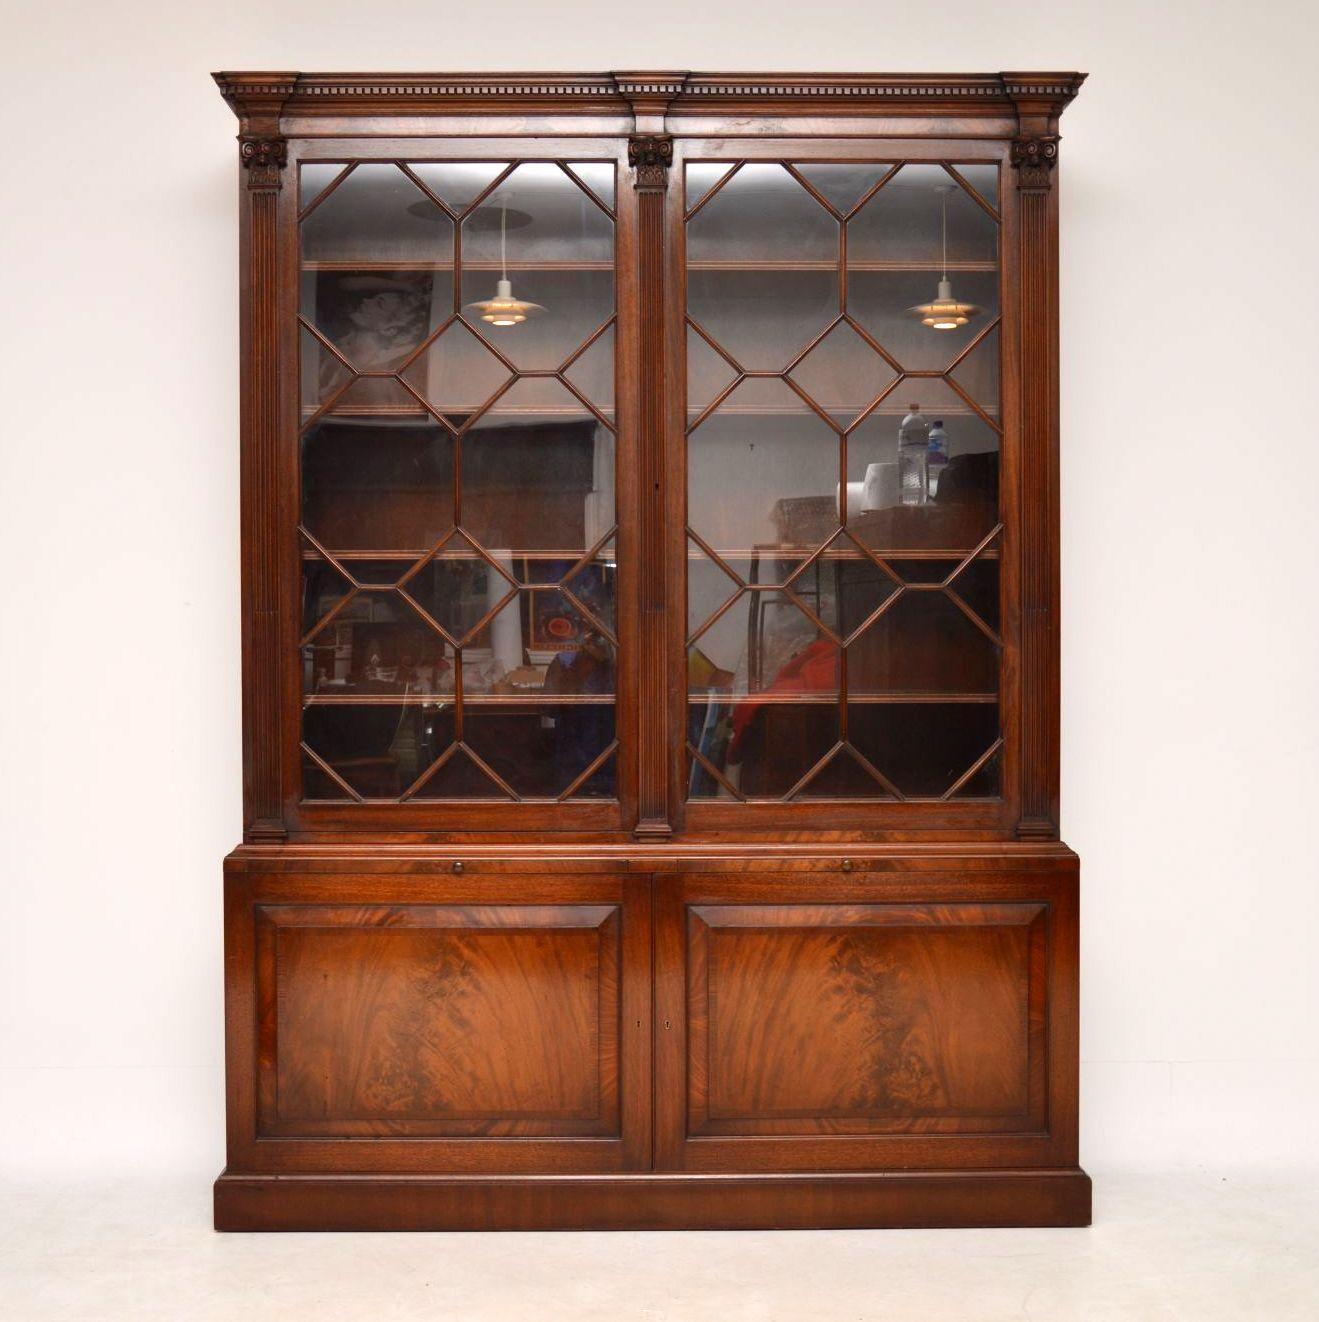 Very impressive large antique mahogany bookcase over cupboard in good condition & dating from around the 1930’s period. Please enlarge all the images, especially the one with the doors open to appreciate all the fine features & the understand the